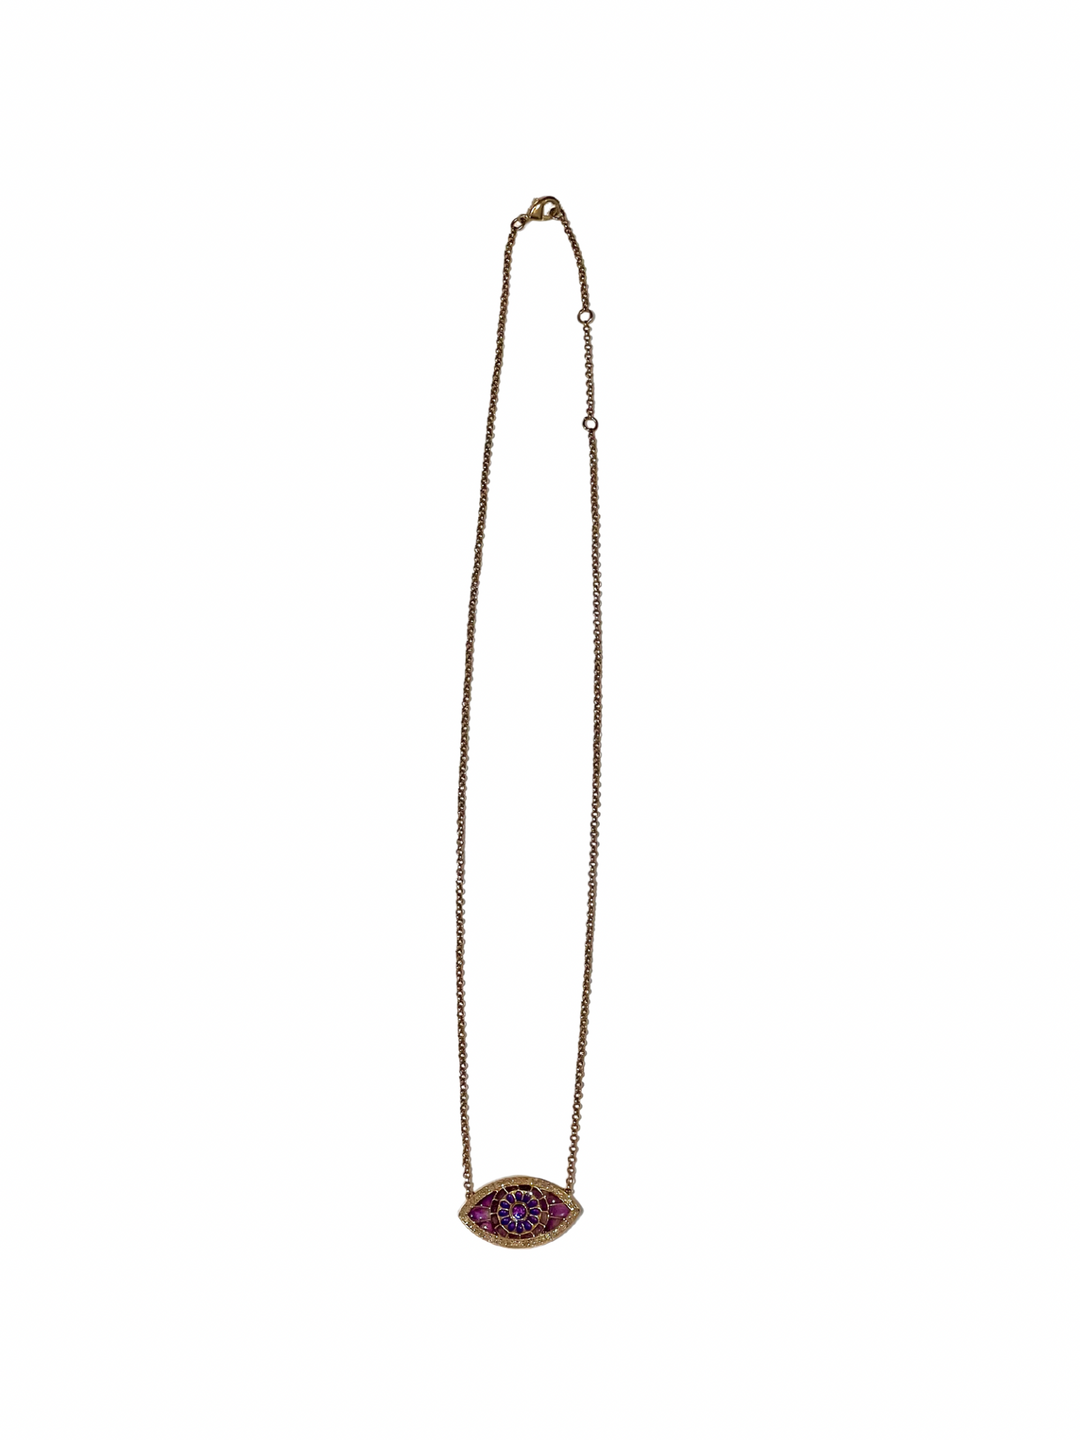 The Woods Fine Jewelry Amethyst Evil Eye Necklace